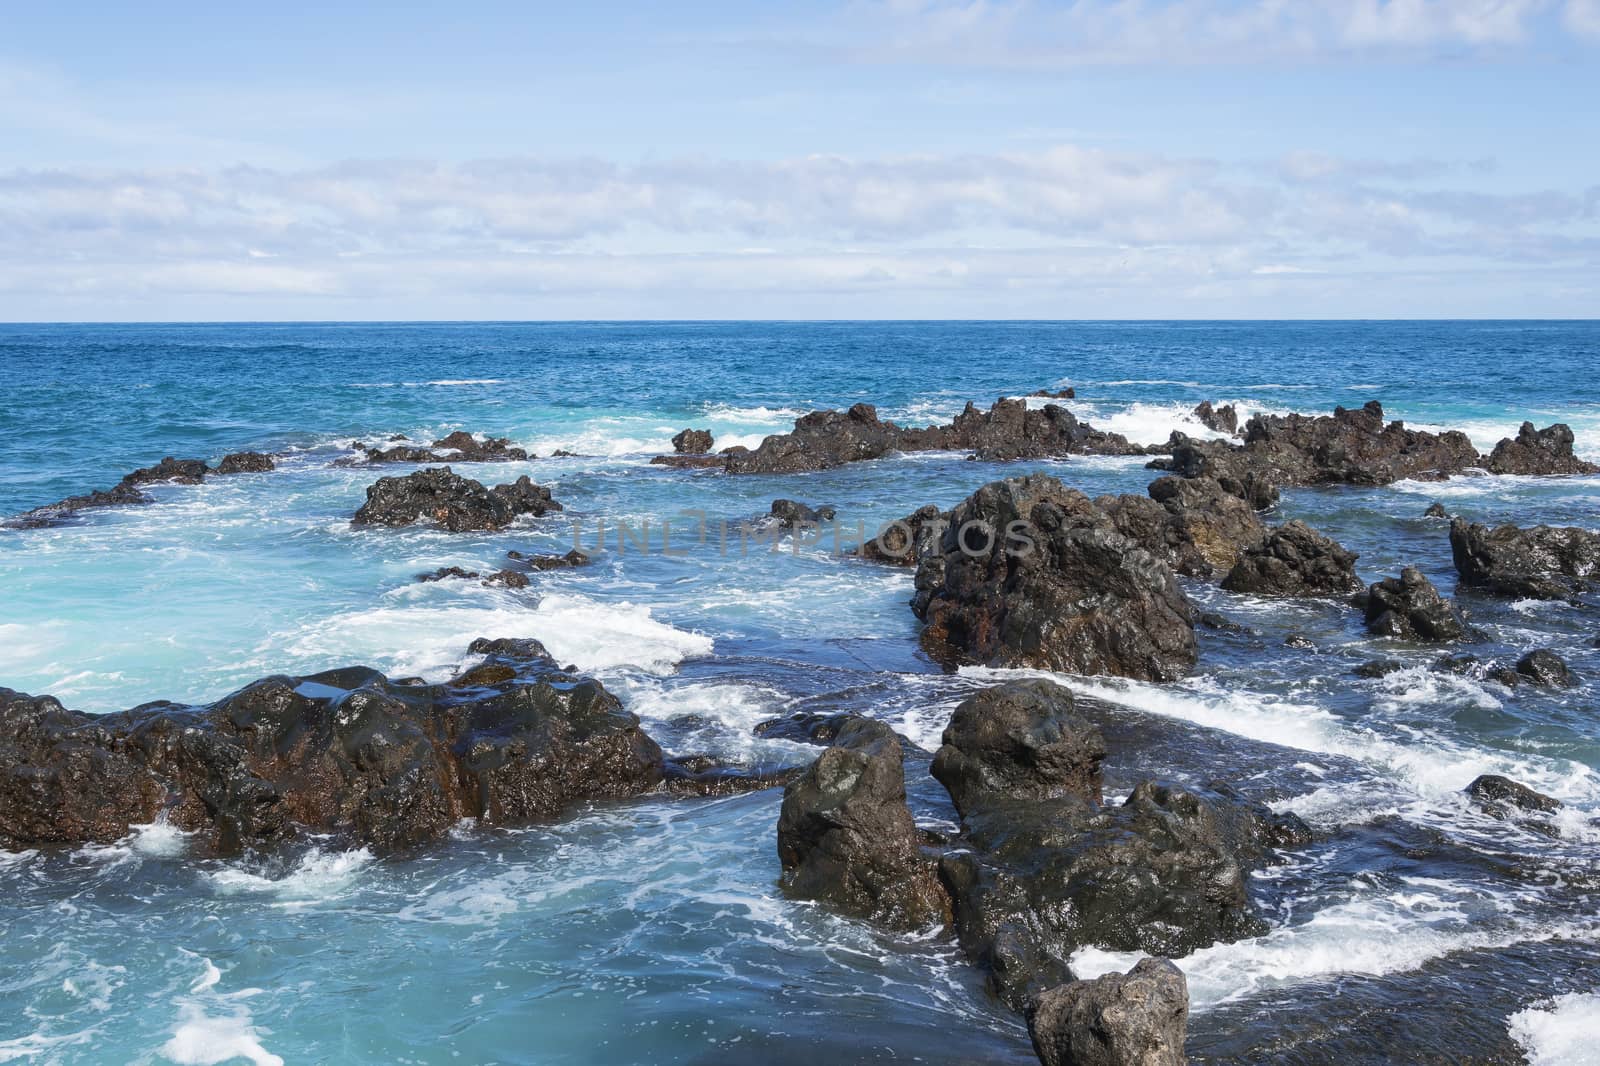 ocean and waves. wonderful horizon water and rocks. beautiful landscape of Canary Islands